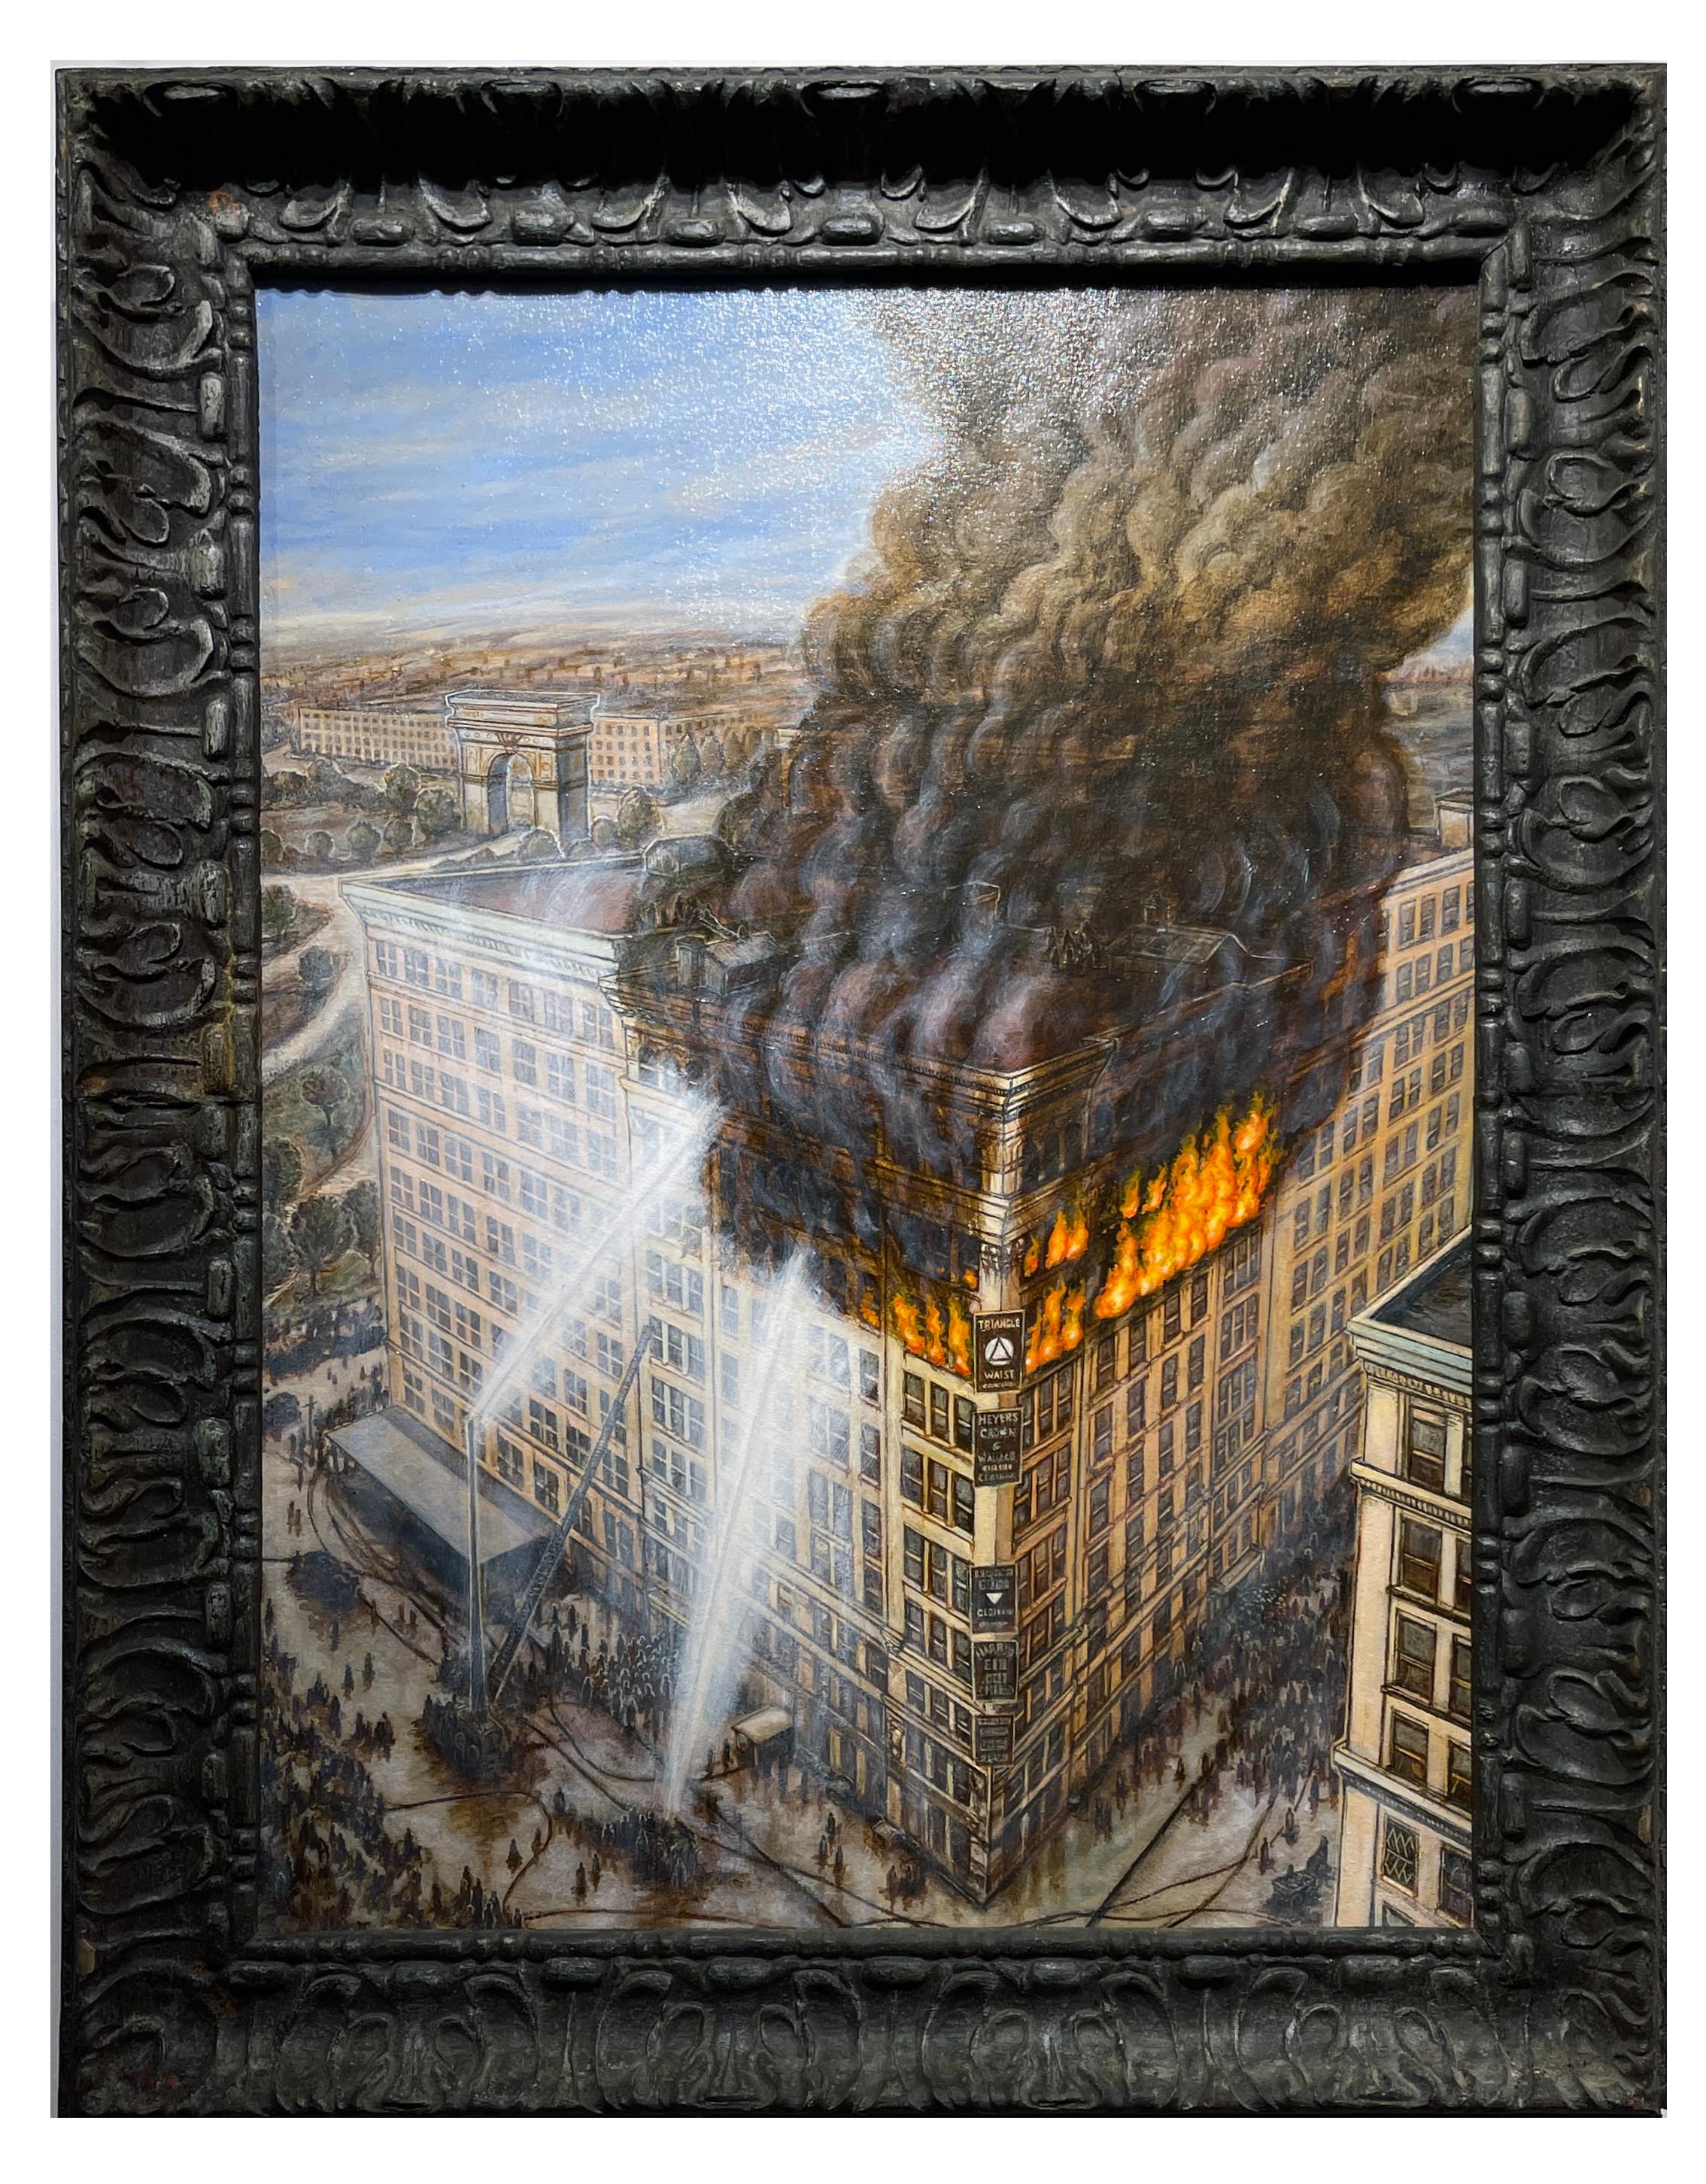 Esper　For　triangle　Fire　The　1stDibs　at　March　eric　Triangle　Sale　Oil　fire　shirtwaist　Shirtwaist　Eric　Painting　of　fire,　24,　drawing　esper,　Edward　Original　factory　edward　triangle　Factory　1911